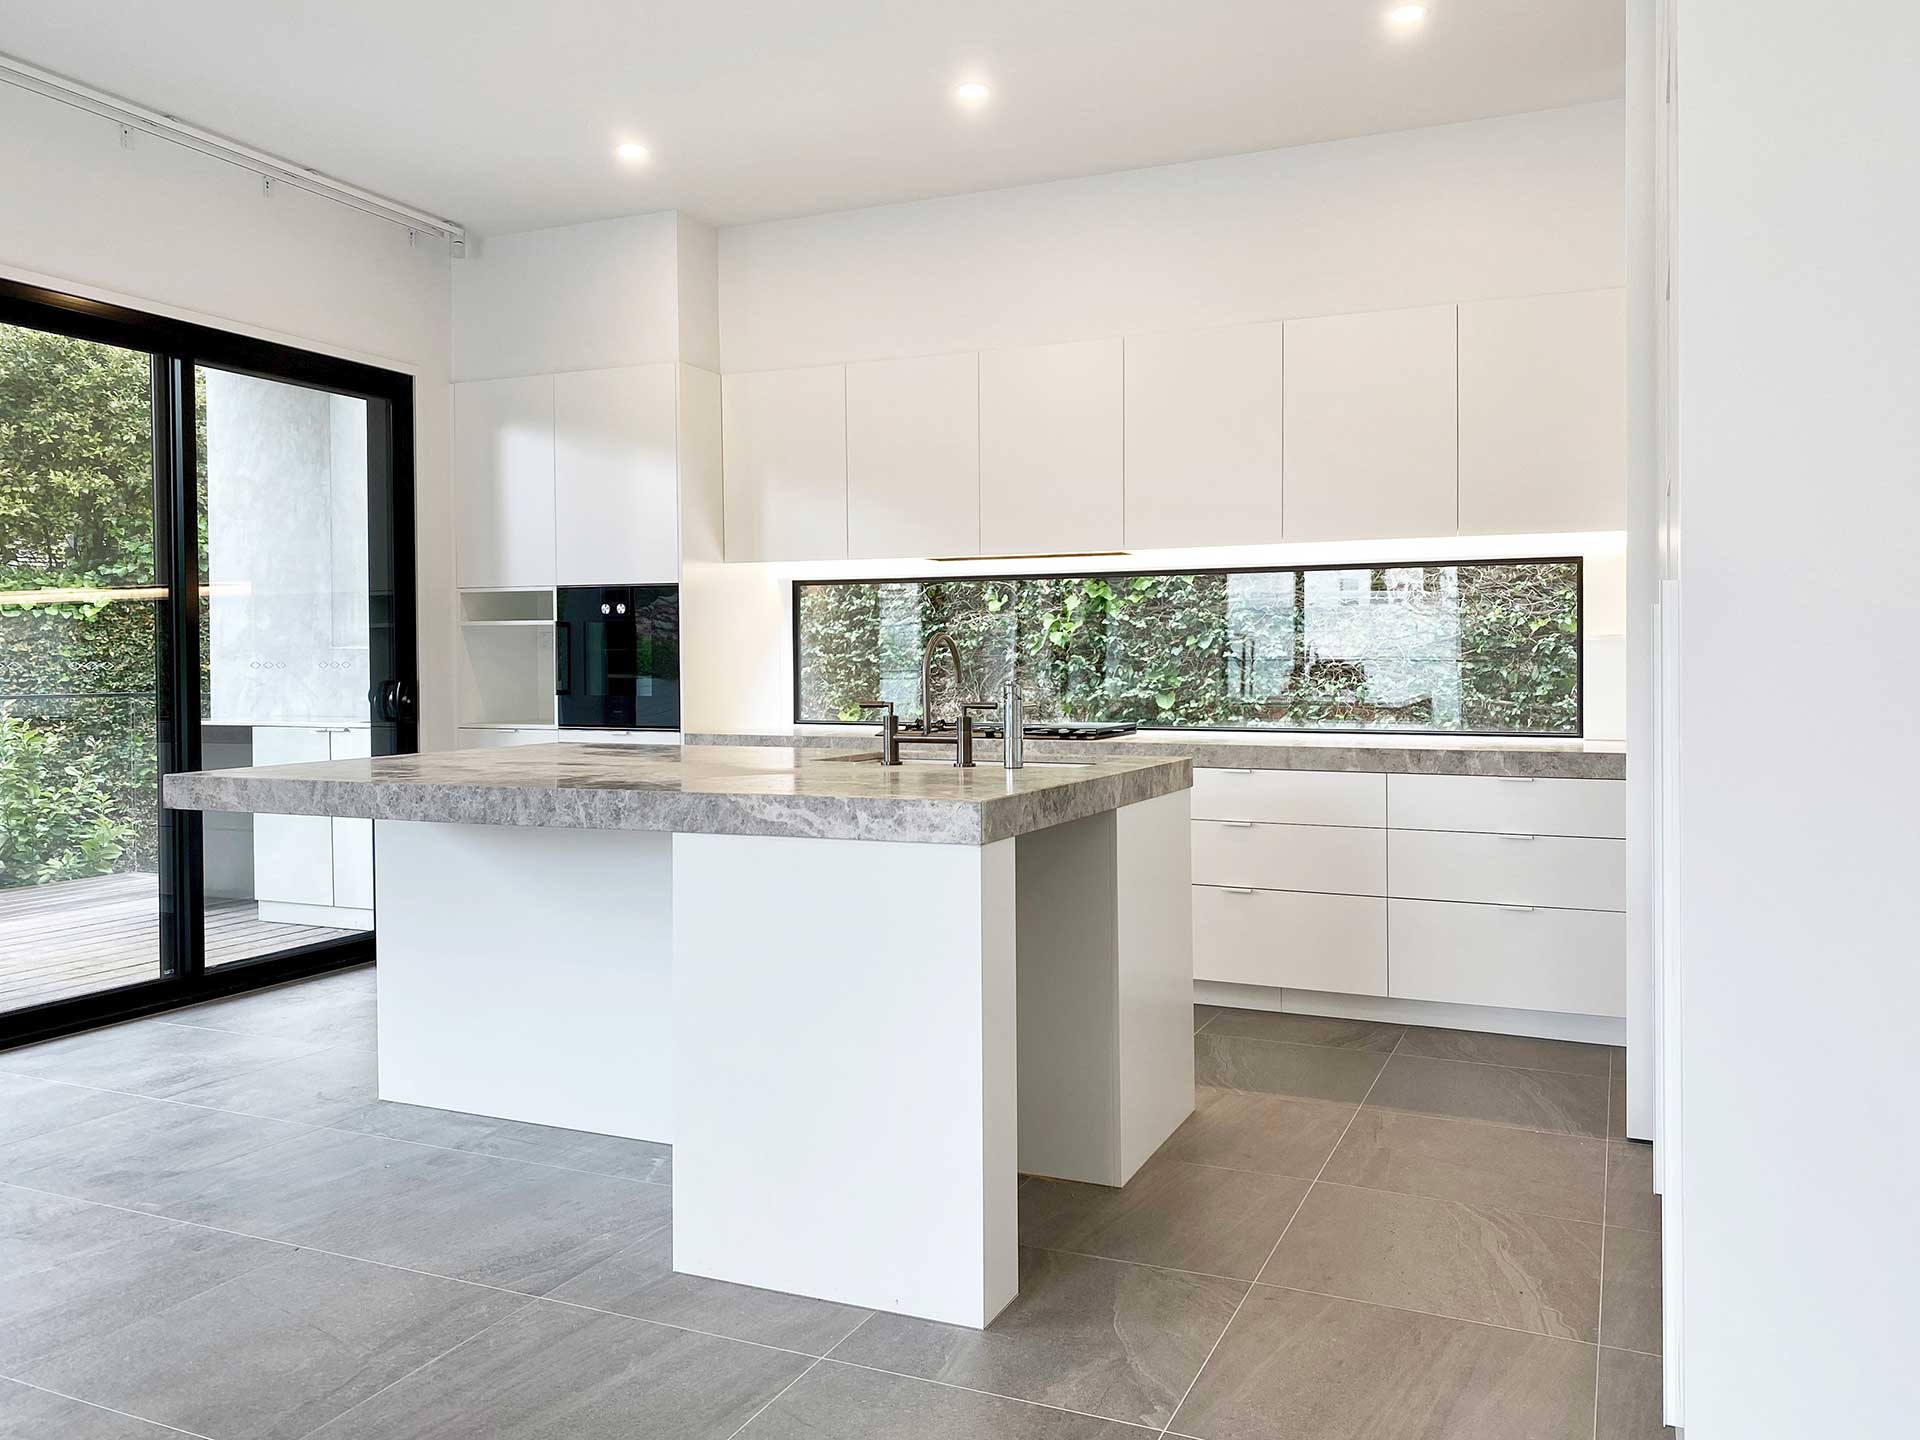 Sophisticated And Modern Design On Display At The Toorak Showroom